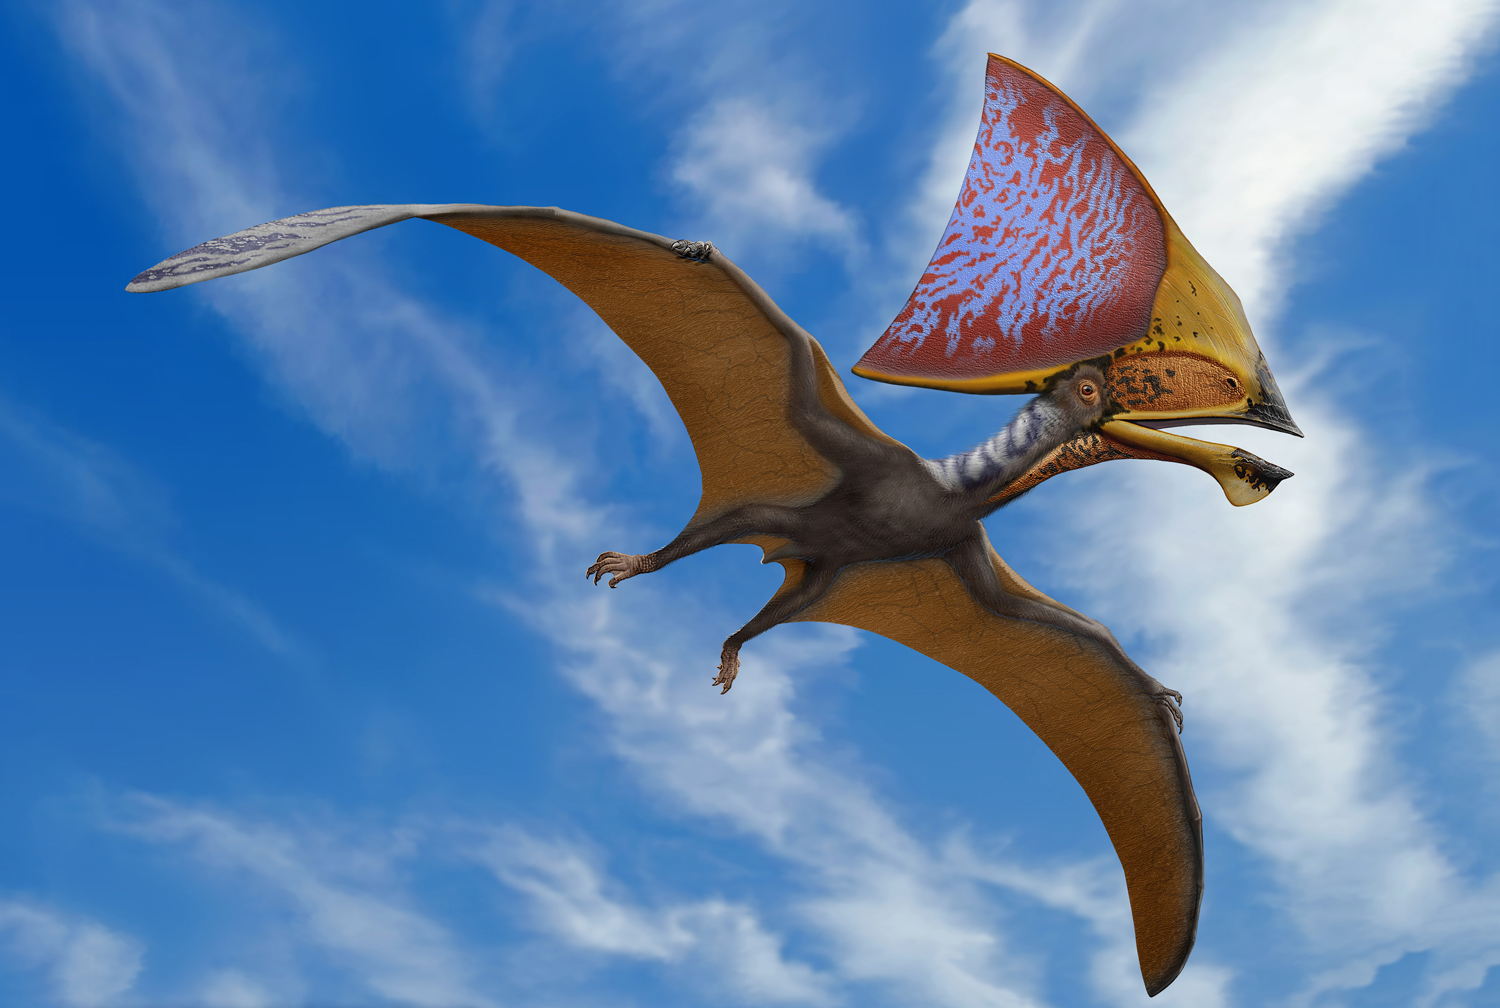 A prehistoric pterosaur with a large bony structure on its head is in flight.